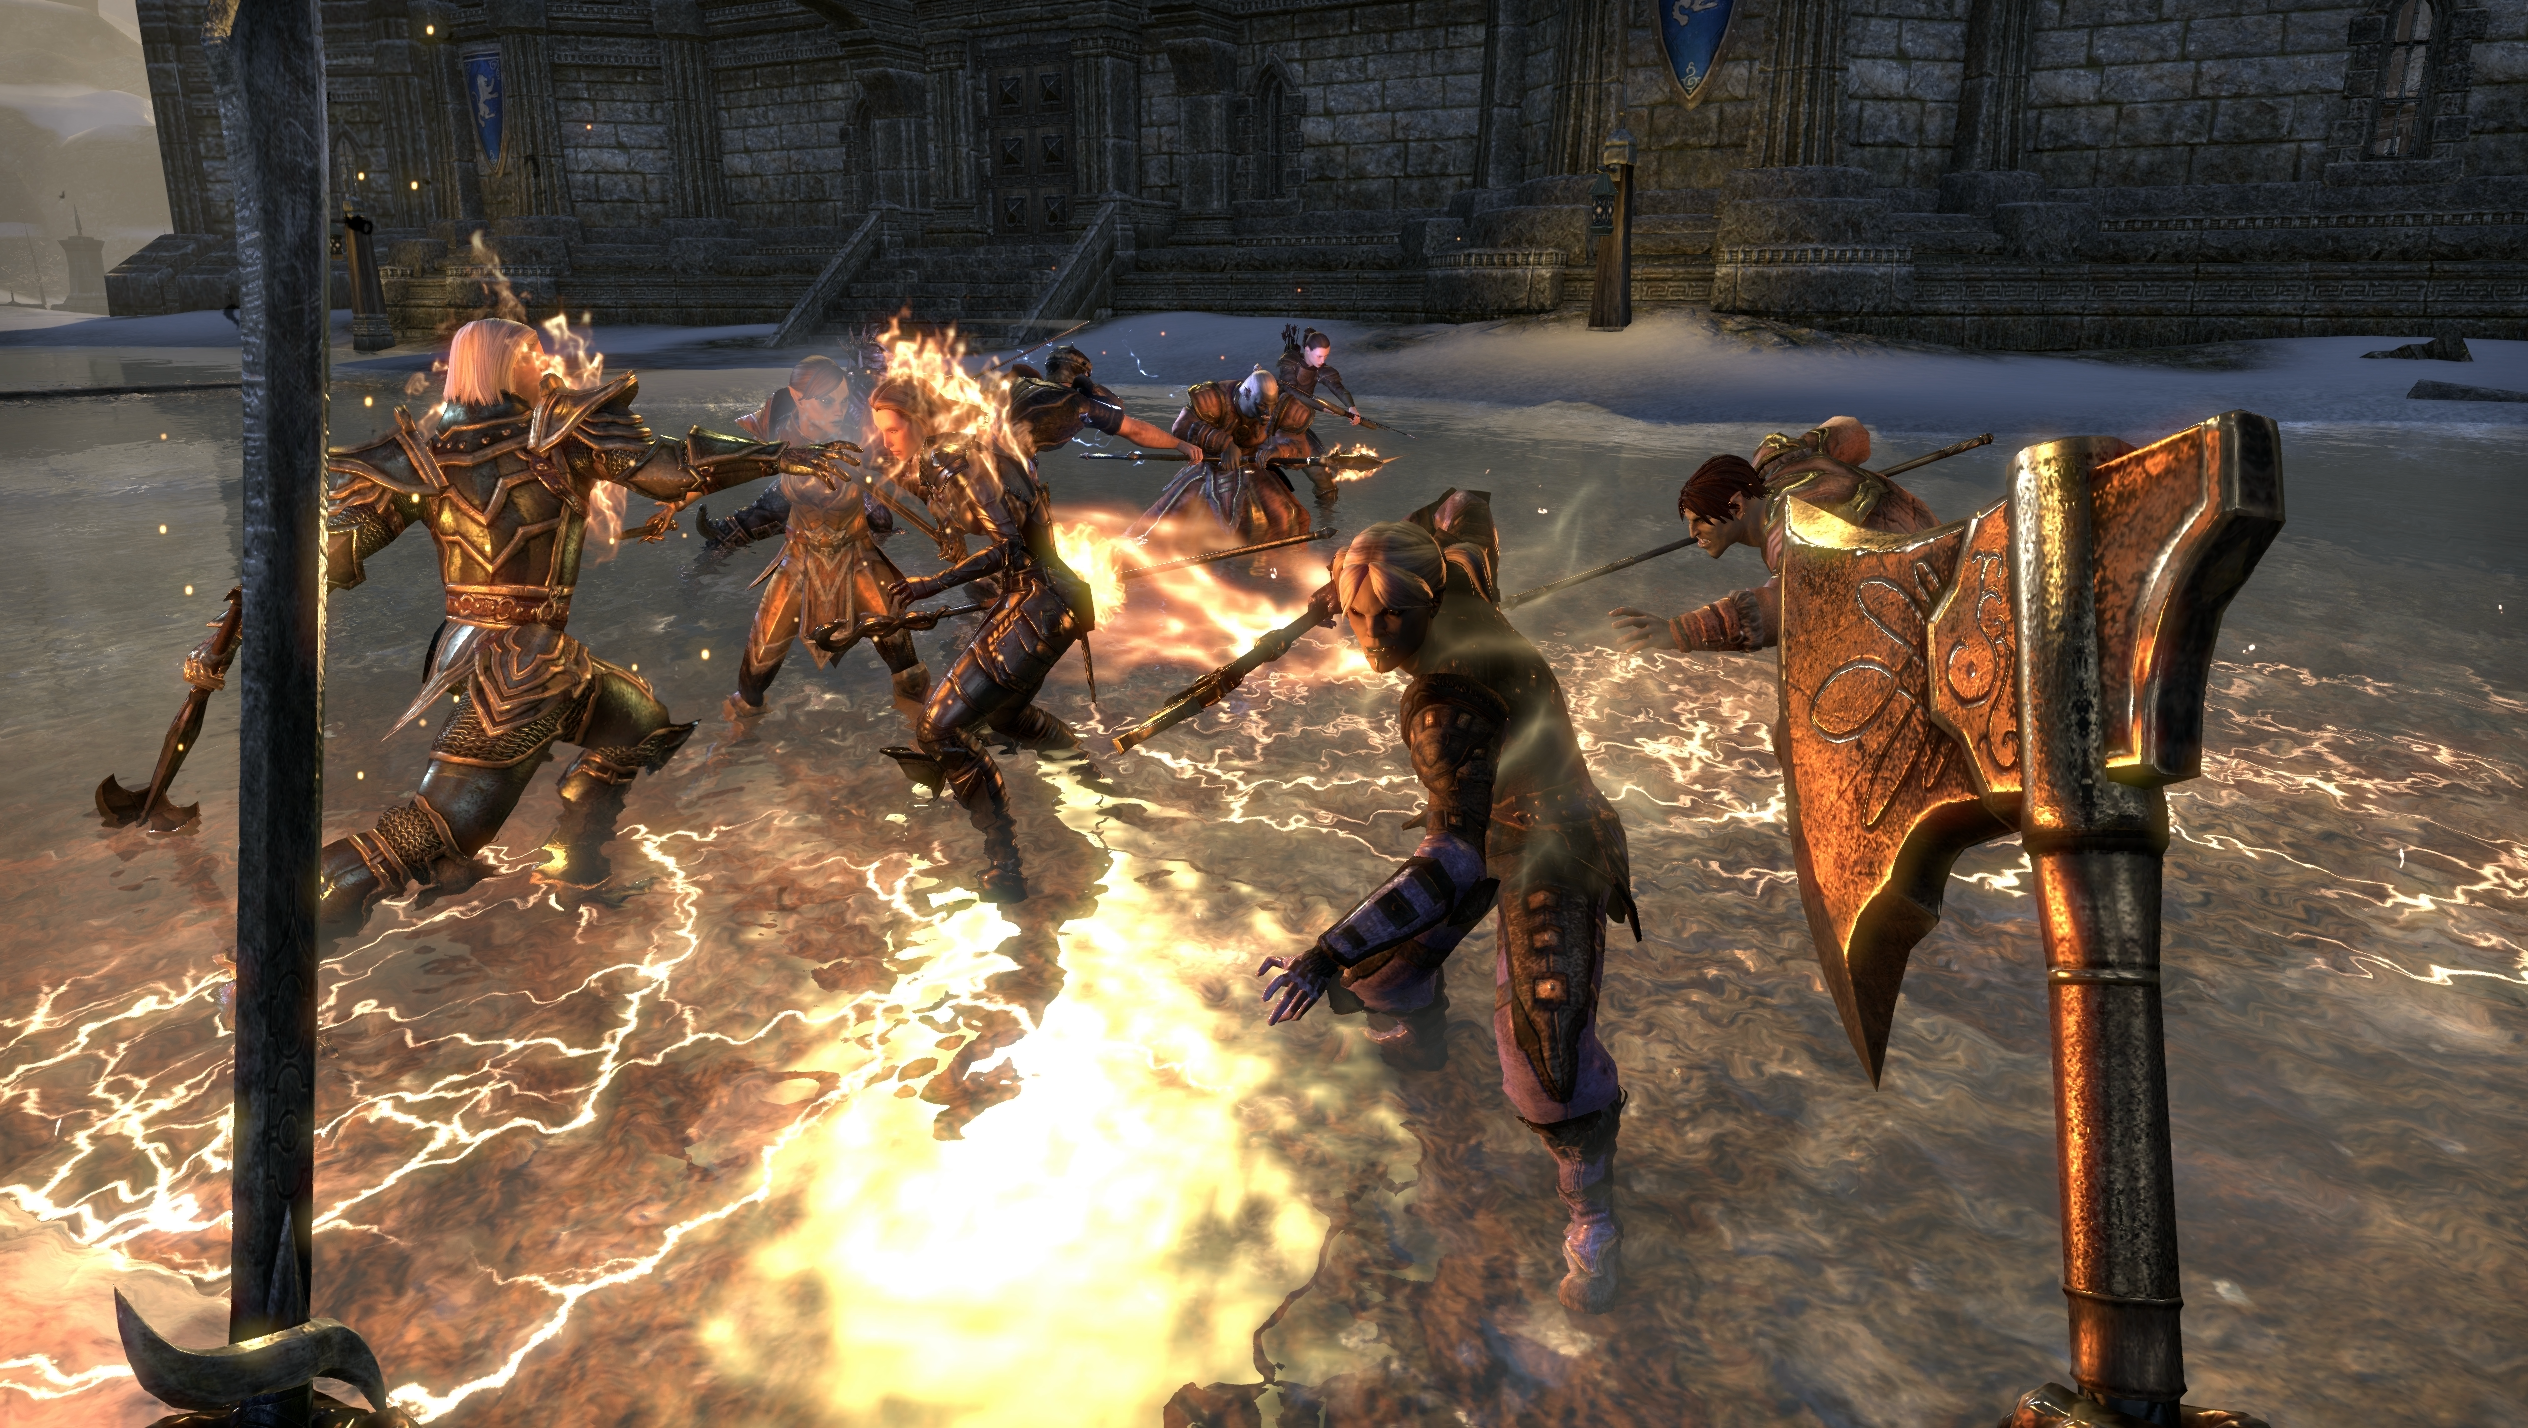 Still Haven’t Tried TESO? Here’s a Chance to Get it Cheap